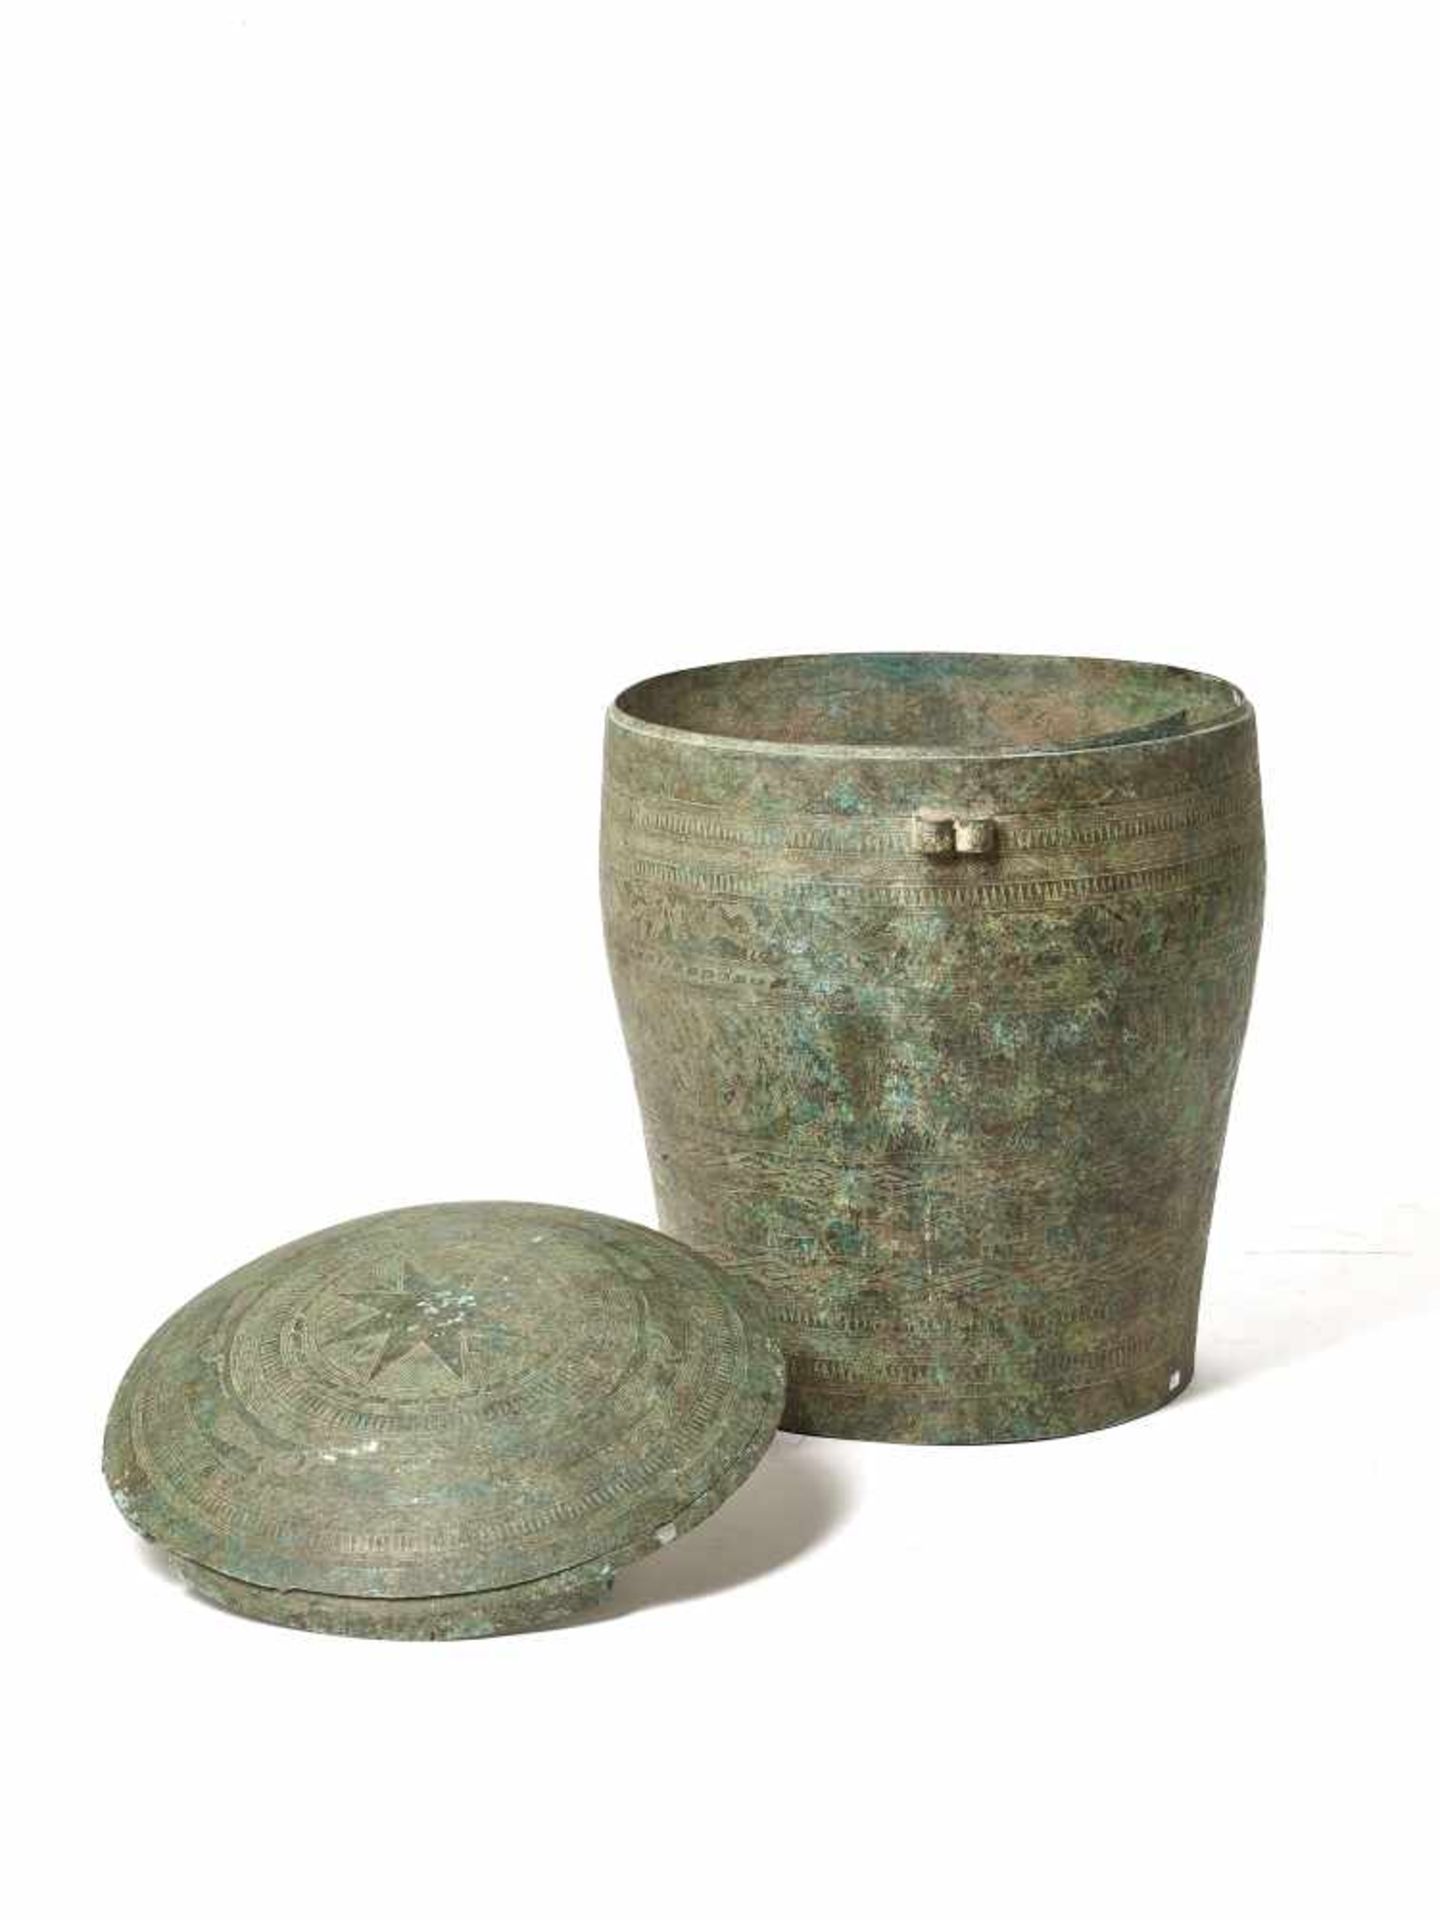 A LARGE AND RARE BRONZE FOOD STORAGE VESSEL, SONG DYNASTYBoth the vessel and the lid are decorated